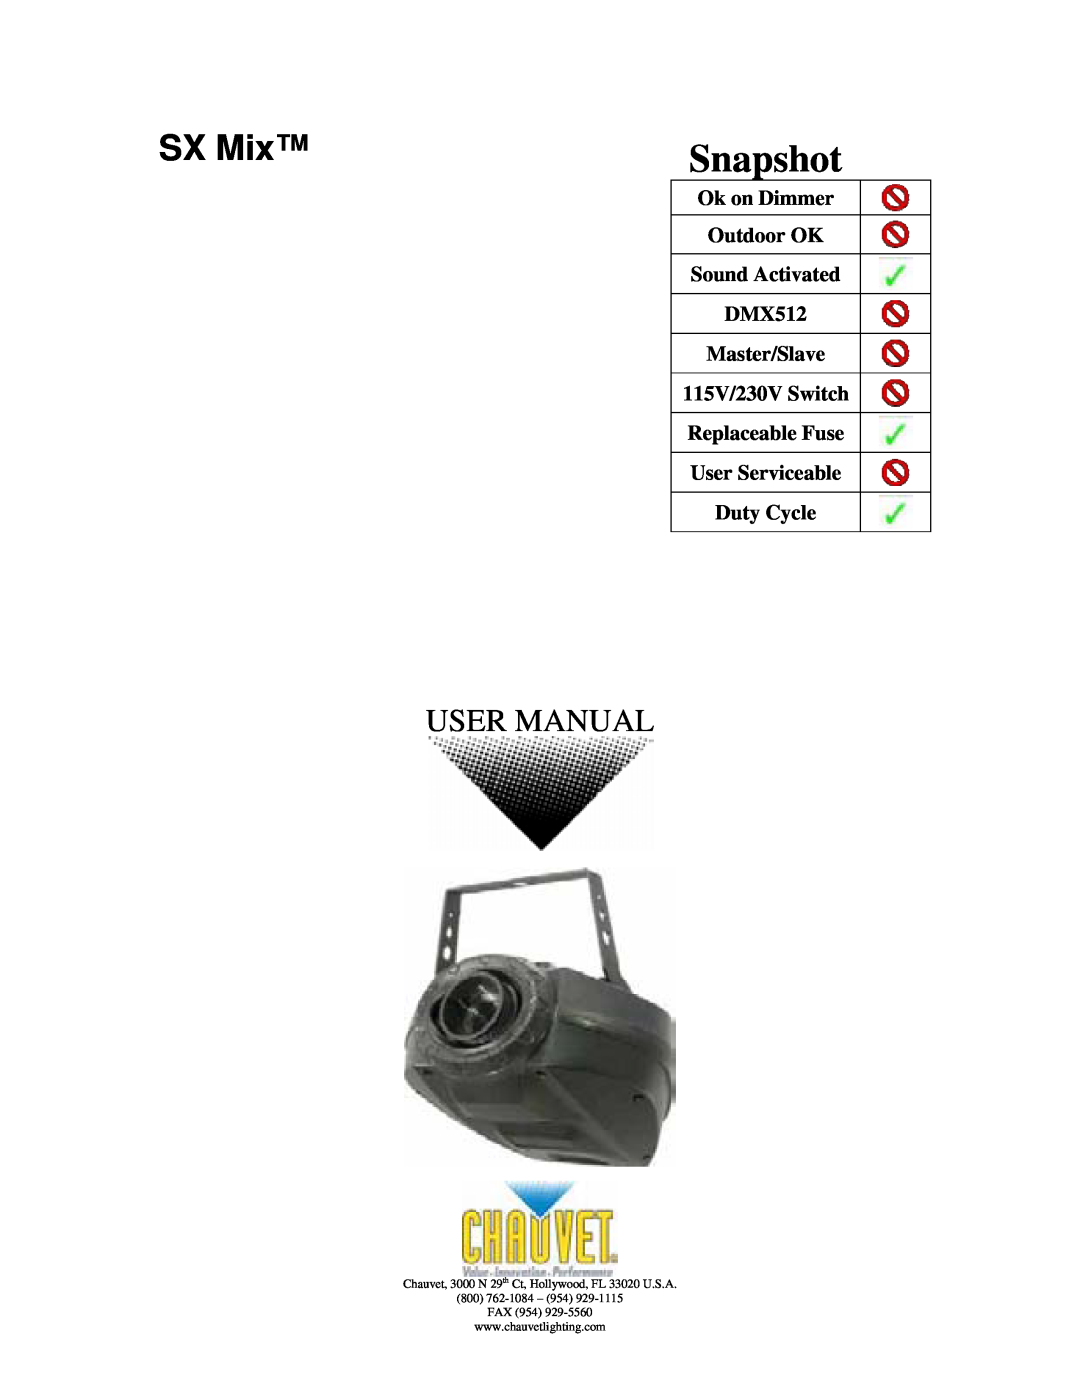 Chauvet DMX512 user manual Snapshot, SX Gobo, Ok on Dimmer, Outdoor OK, Sound Activated, 115V/230V Switch, Duty Cycle 